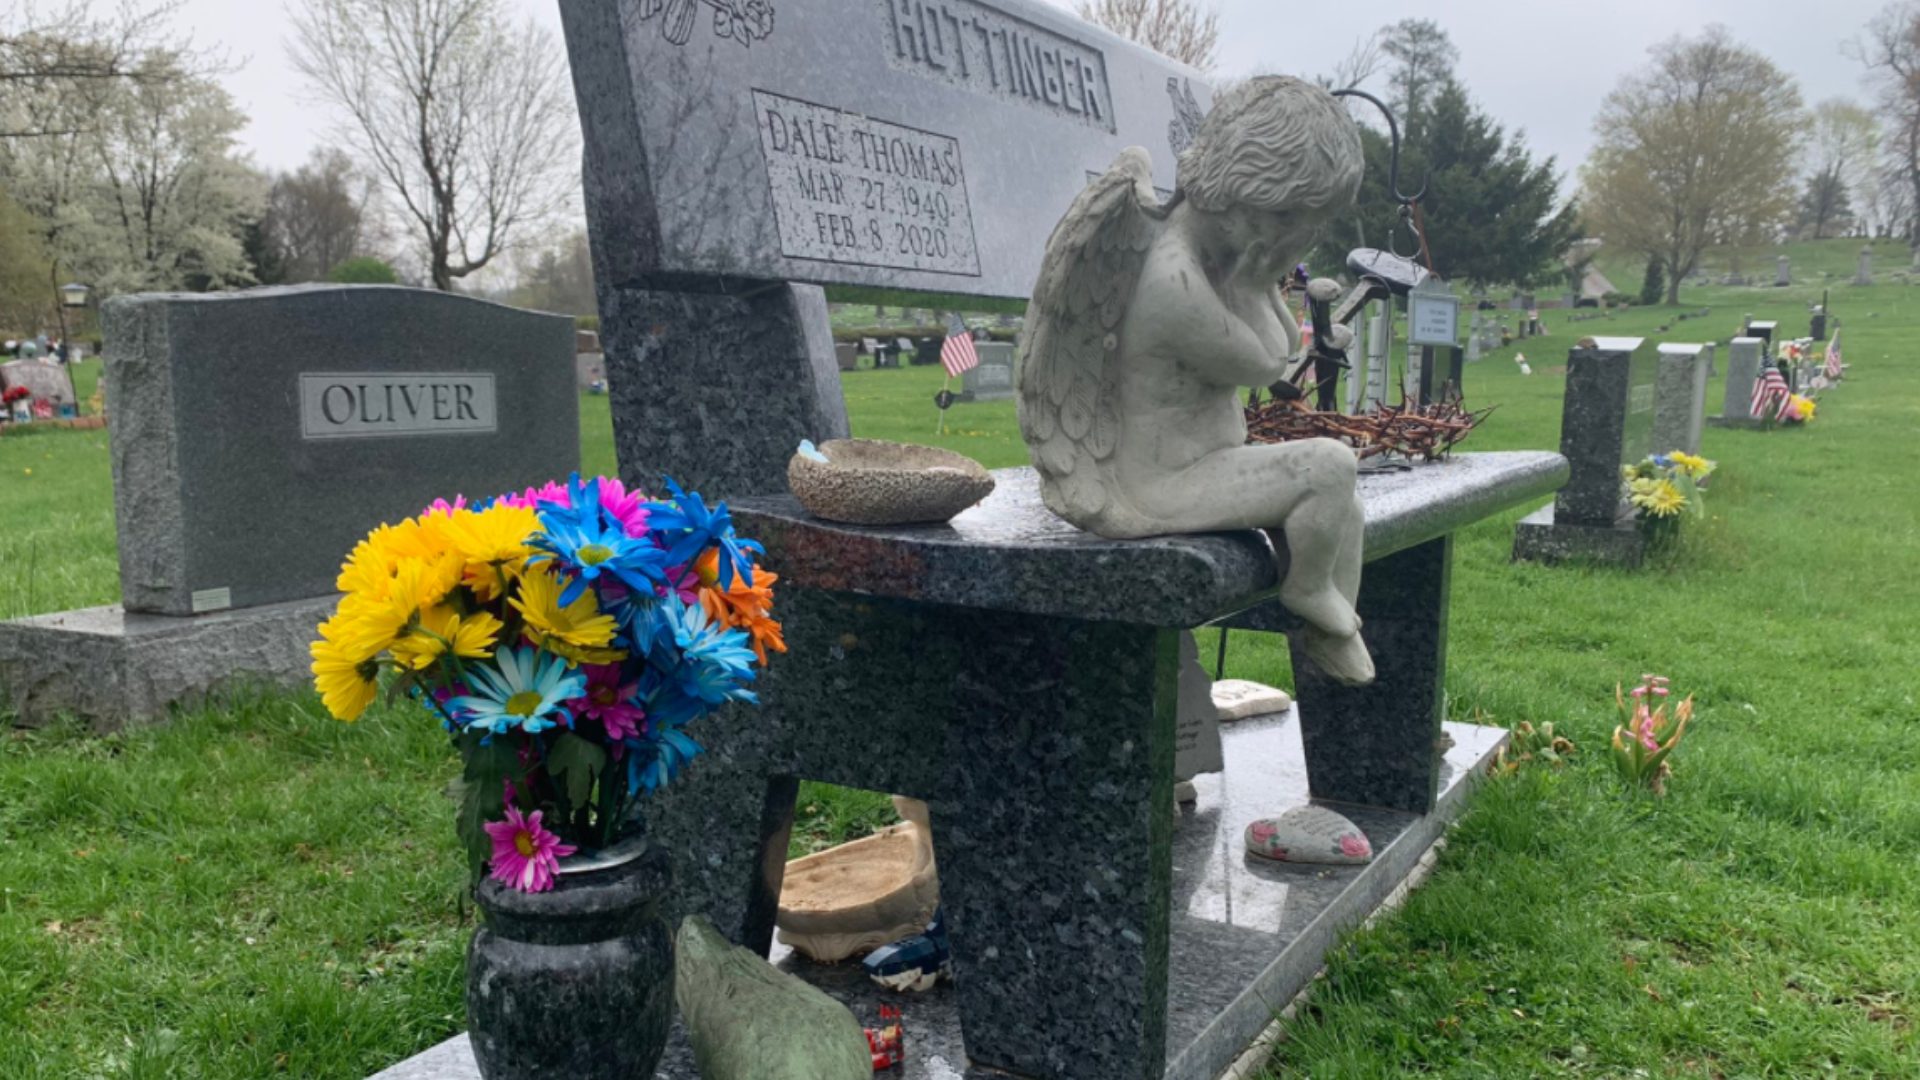 Newark police are trying to find whoever stole from a state senator's mom as she visited her husband's grave over the weekend.